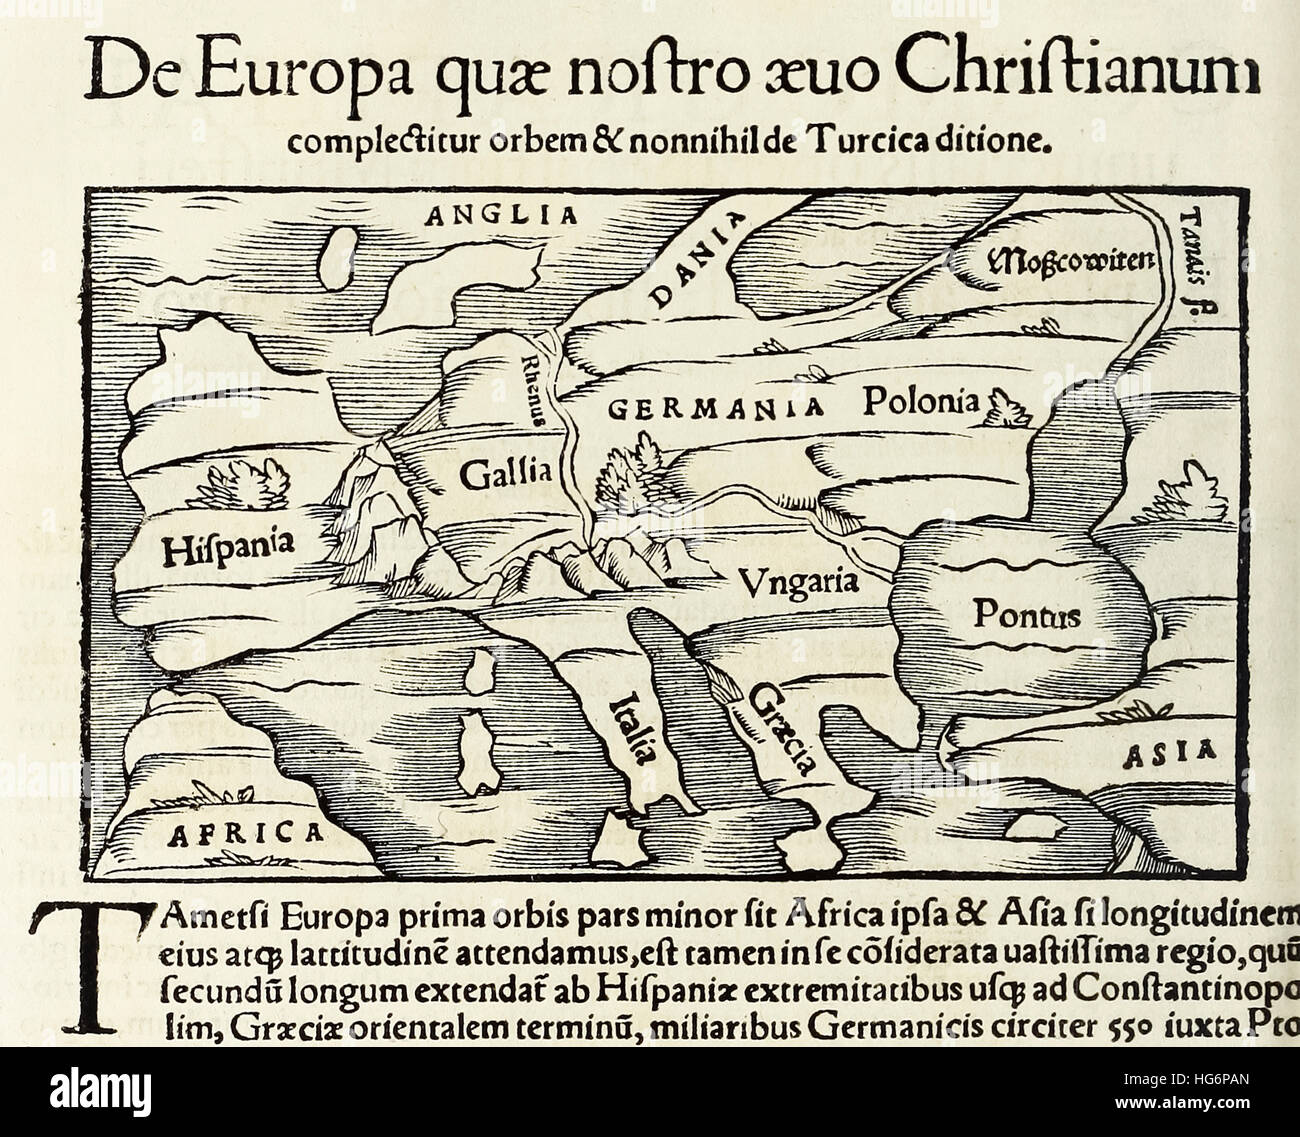 ‘De Europa, quae nostro aeuo Christianum’ a map of Christian Europe; woodcut from 1550 edition of ‘Cosmographia’ by  Sebastian Munster (1488-1552). See description for more information. Stock Photo